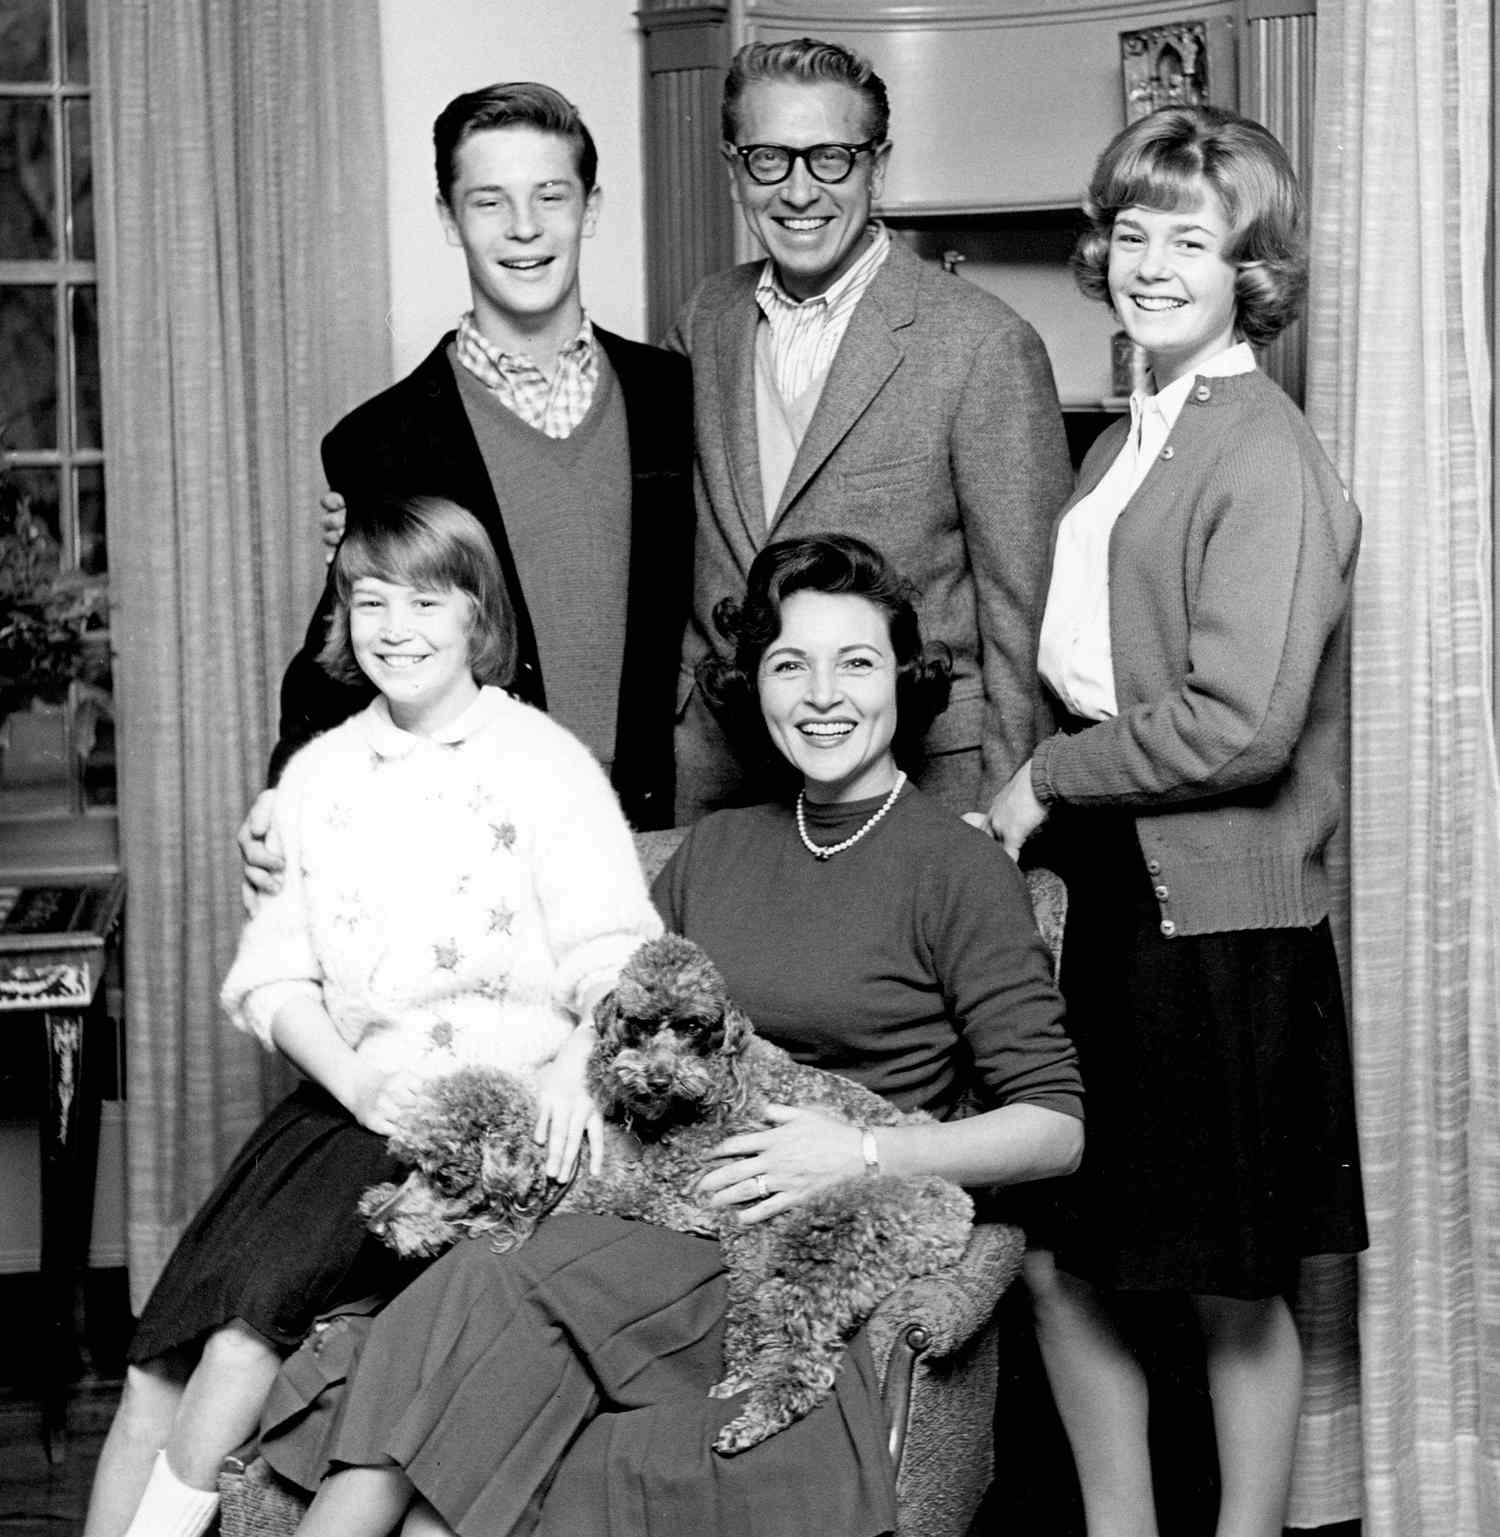 BETTY WHITE with her family. The Ludden family, SARAH, DAVID, husband ALLEN, MARTHA, BETTY WHITE, and their dogs, Willie and Emma